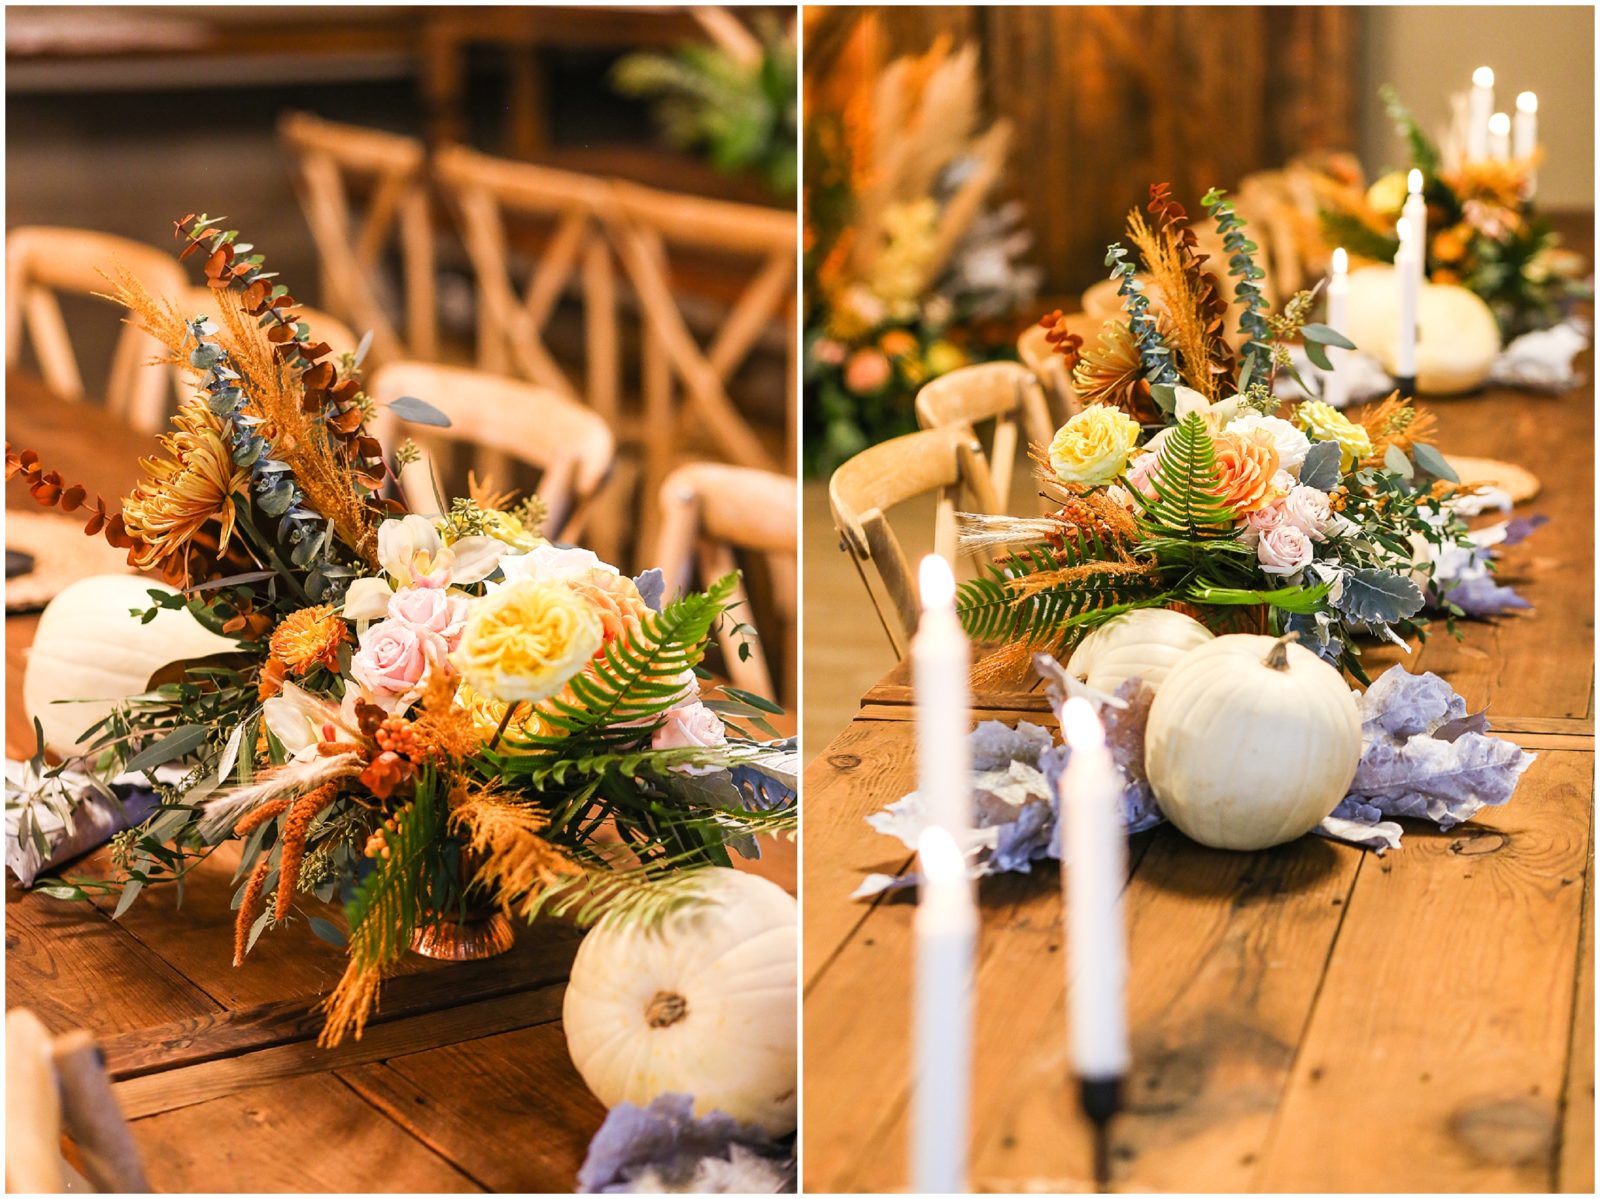 FALL THEMED WEDDING DECOR BY SUPPLY EVENT RENTAL AND HEART AND SOUL KANSAS CITY FLORIST